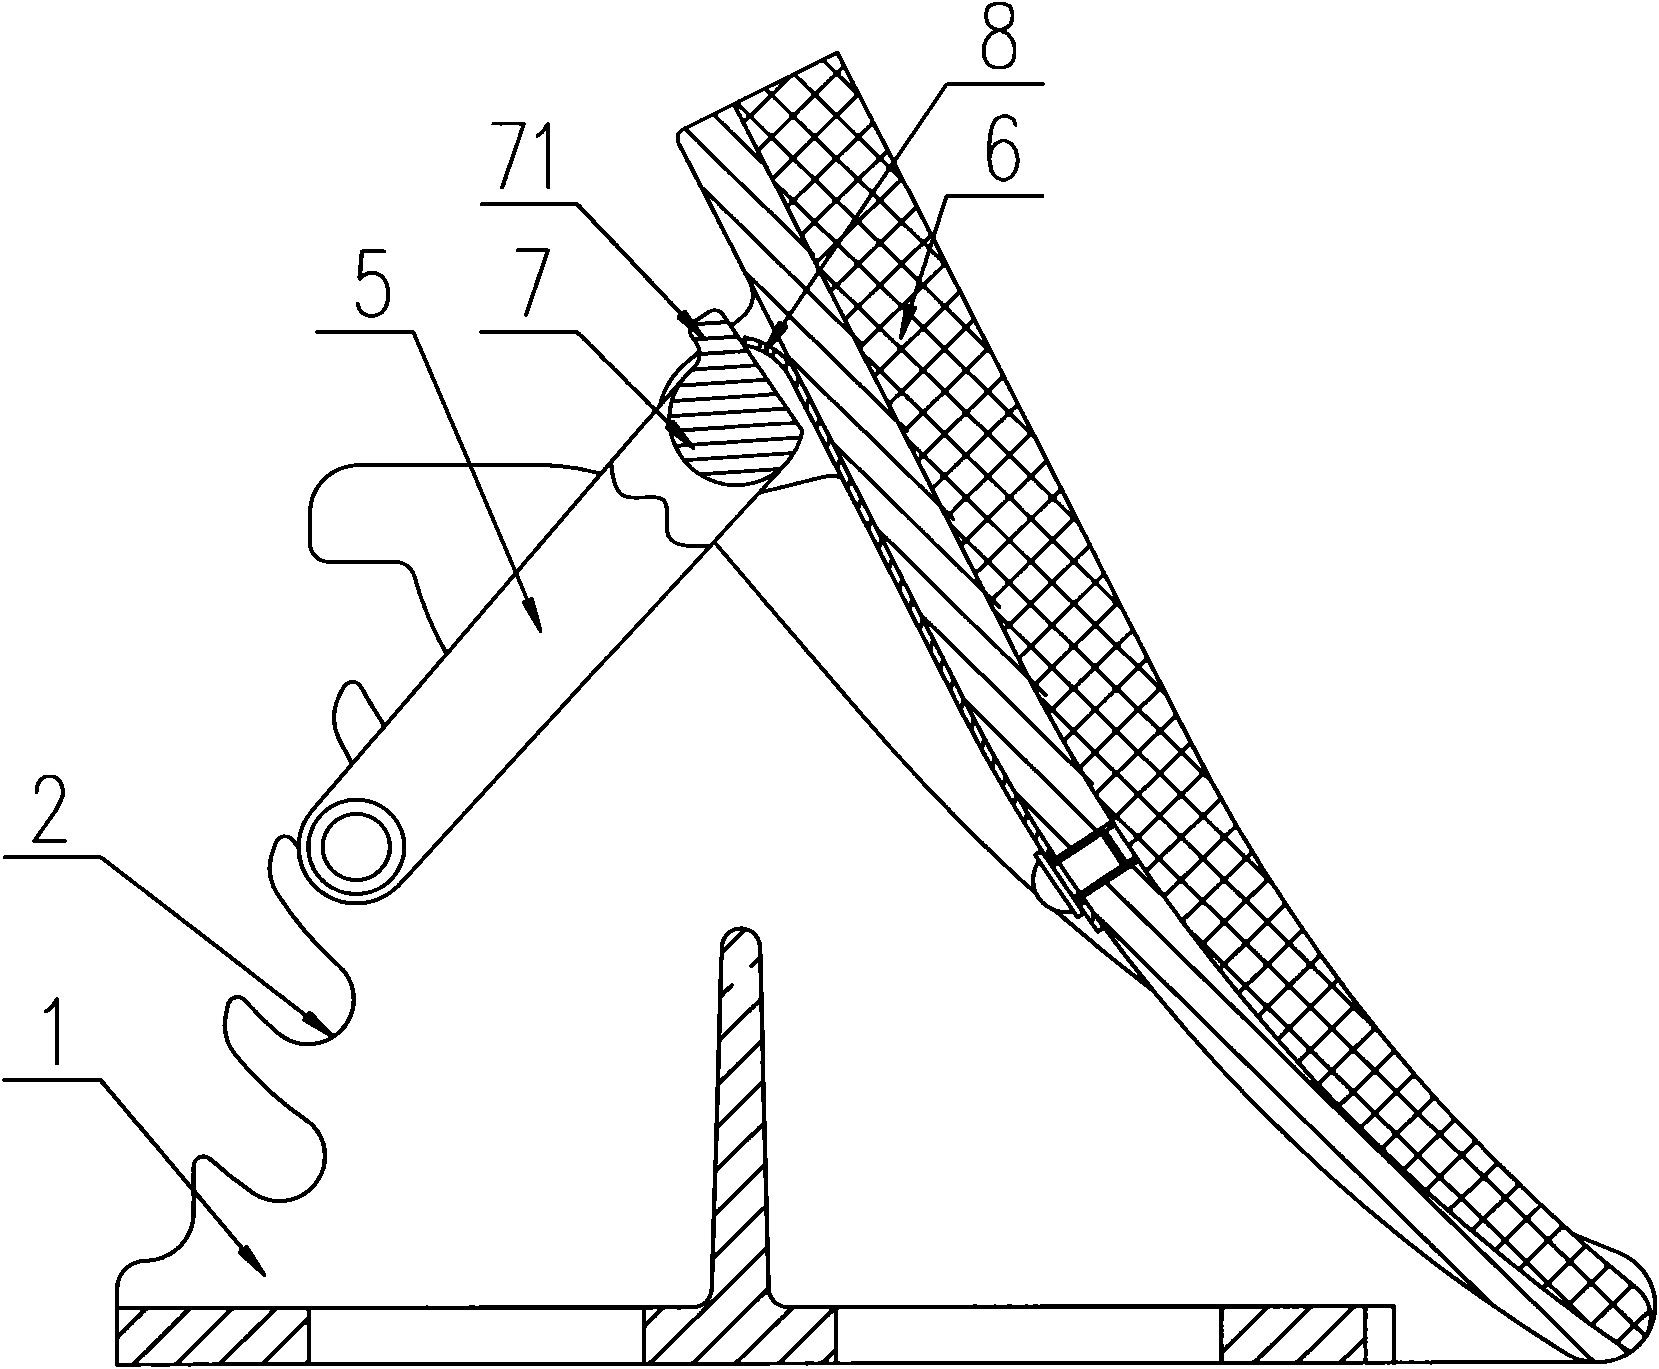 Angle adjusting device for foot plate of starting block